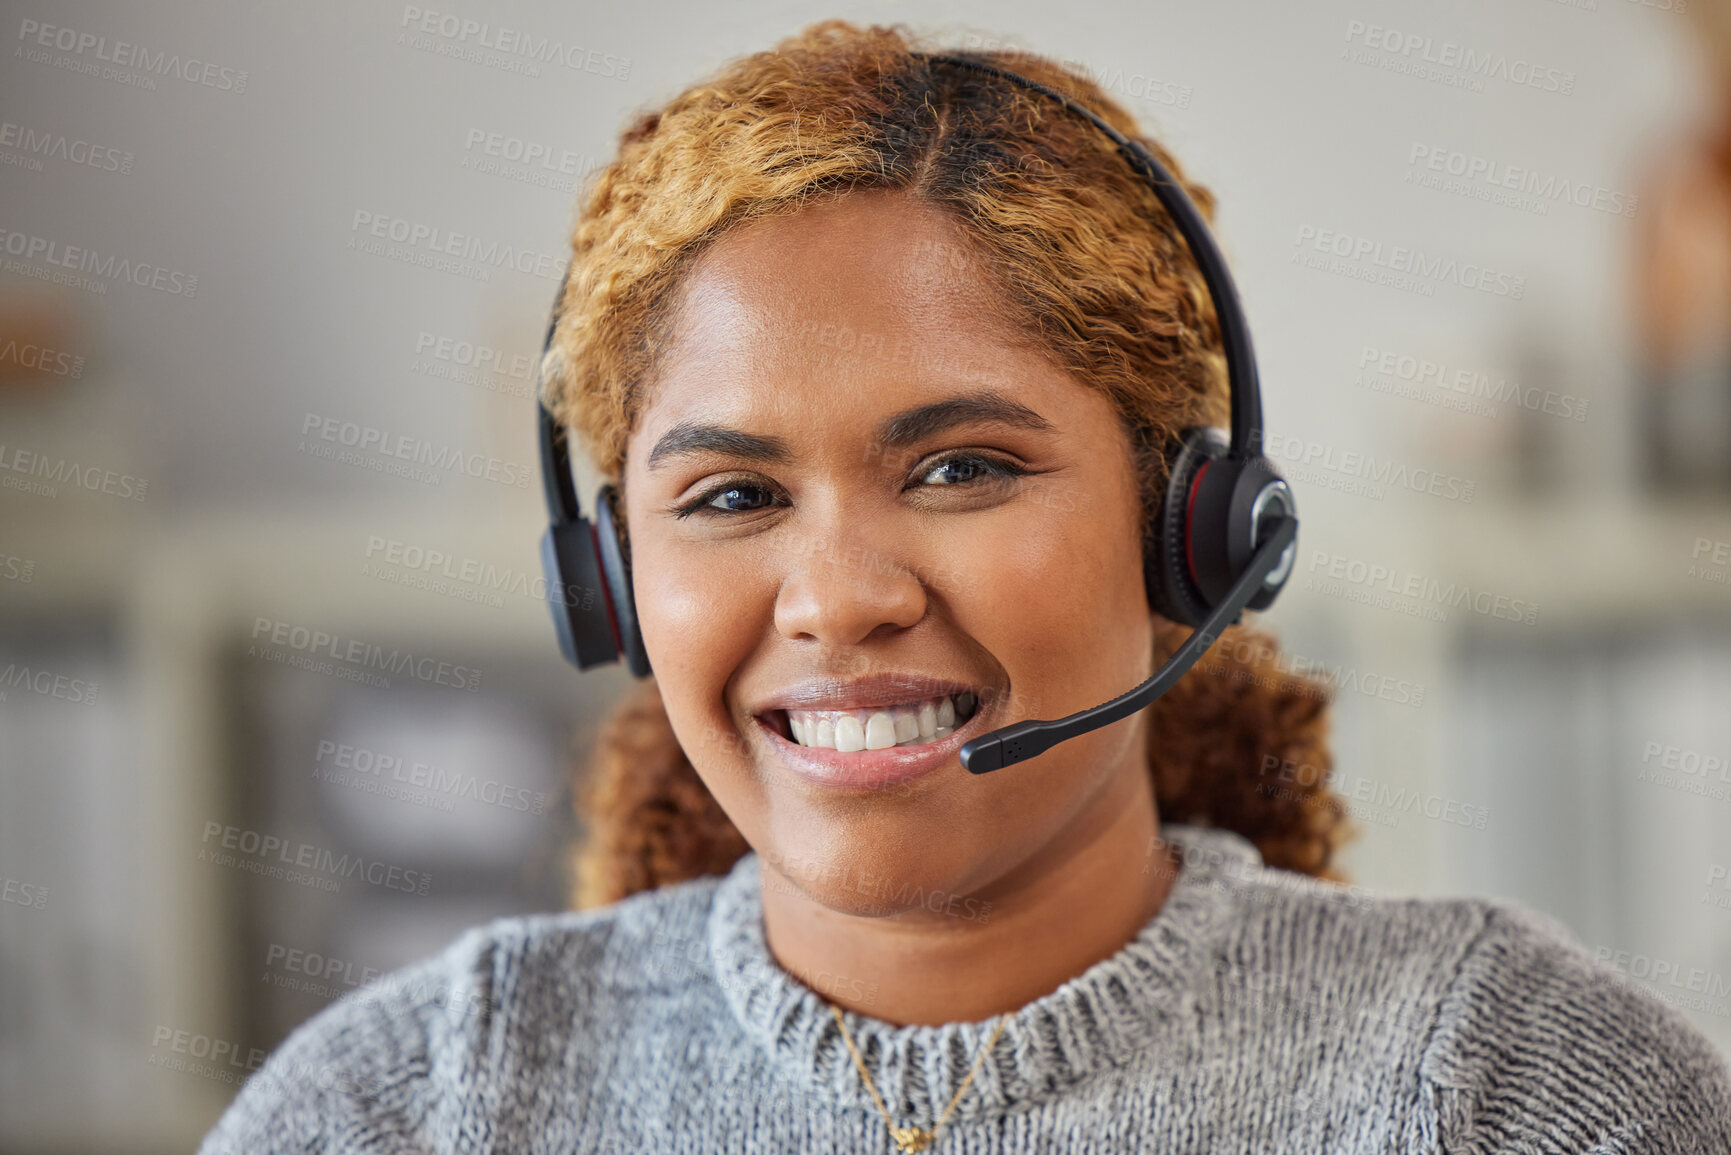 Buy stock photo African female call center agent smiling and happy to help in her office at work. Portrait of a young woman customer service employee looking excited and ready to support clients in her workplace